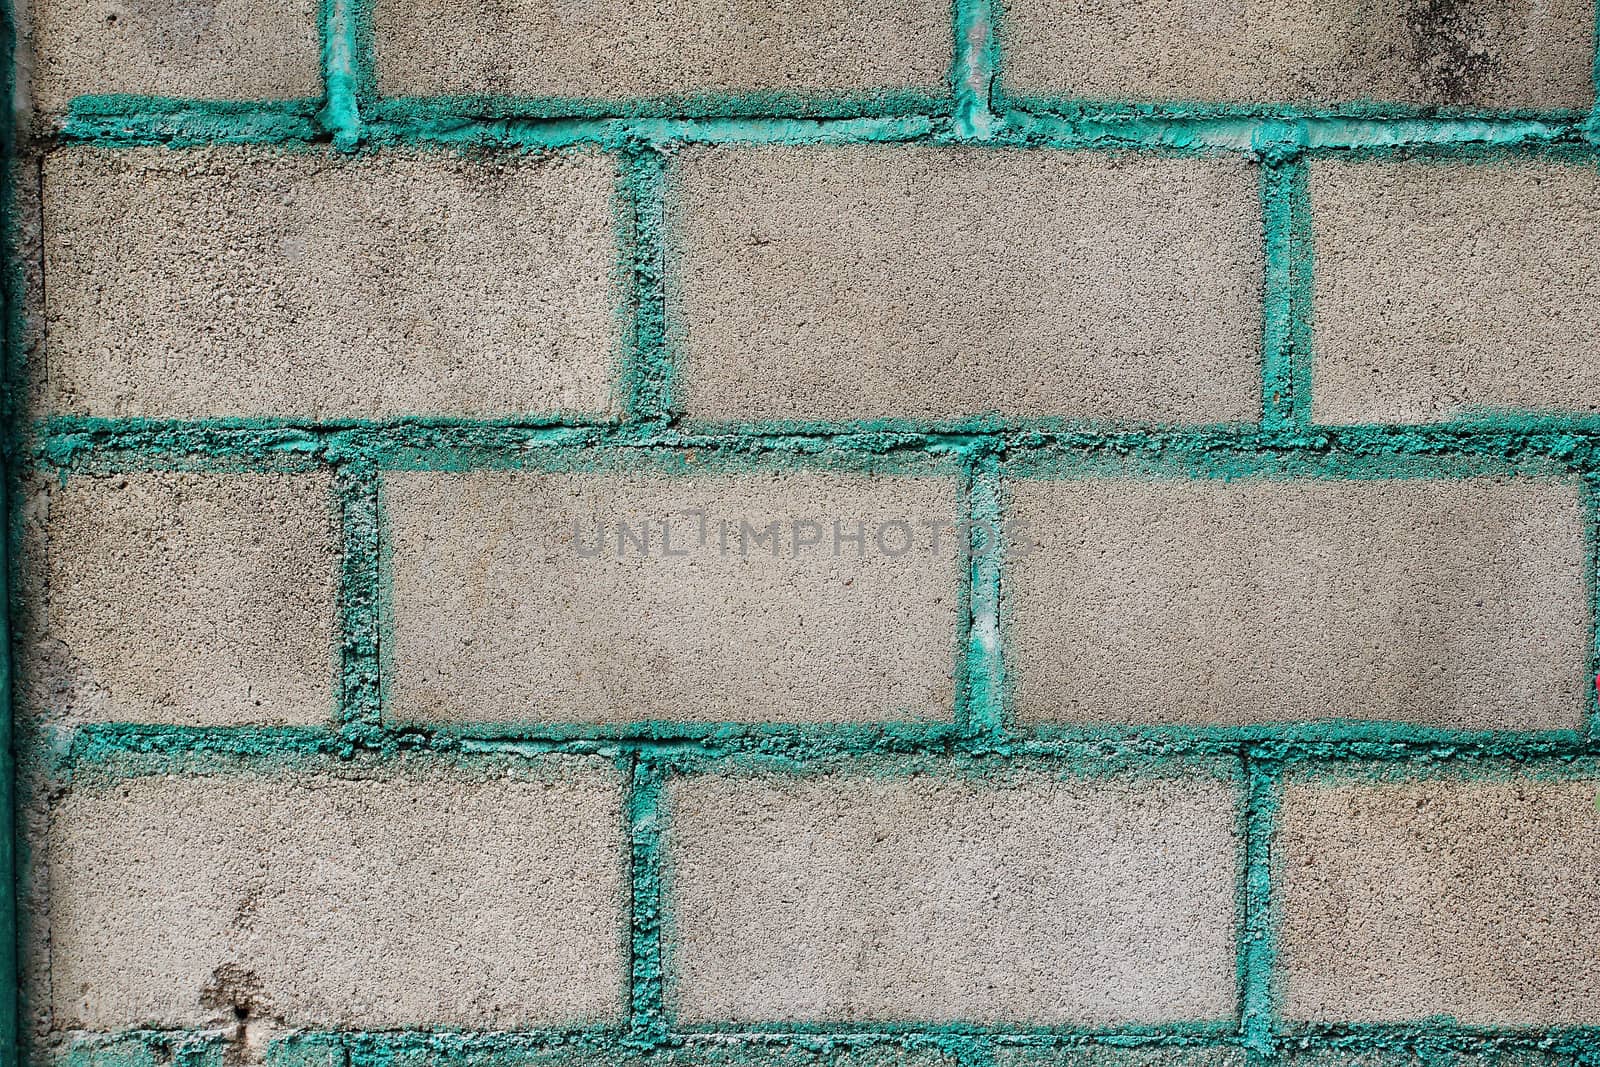 The brick wall paint the joint with green.